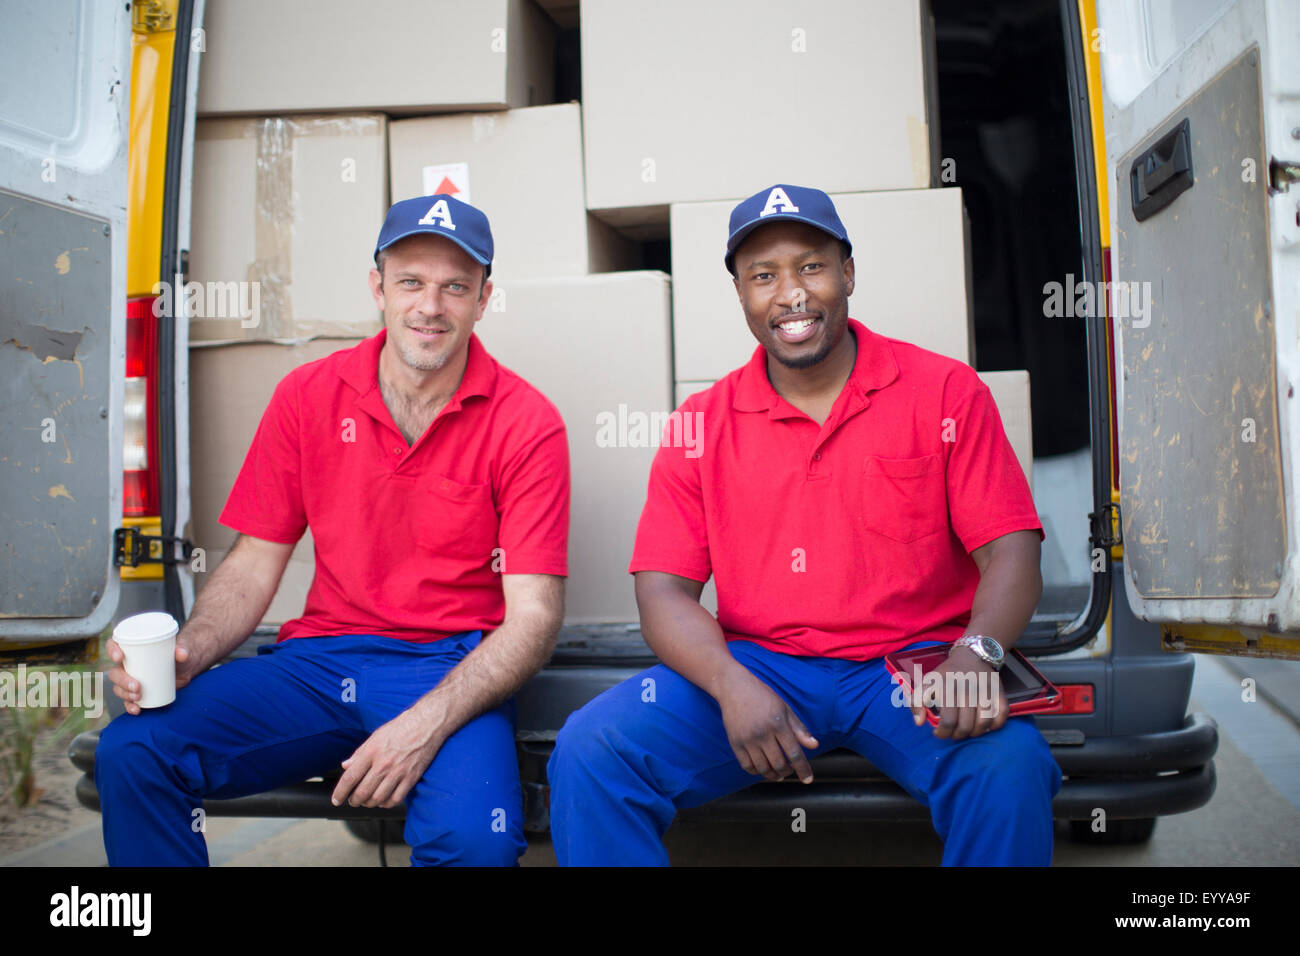 Delivery men sitting with packages in van Stock Photo